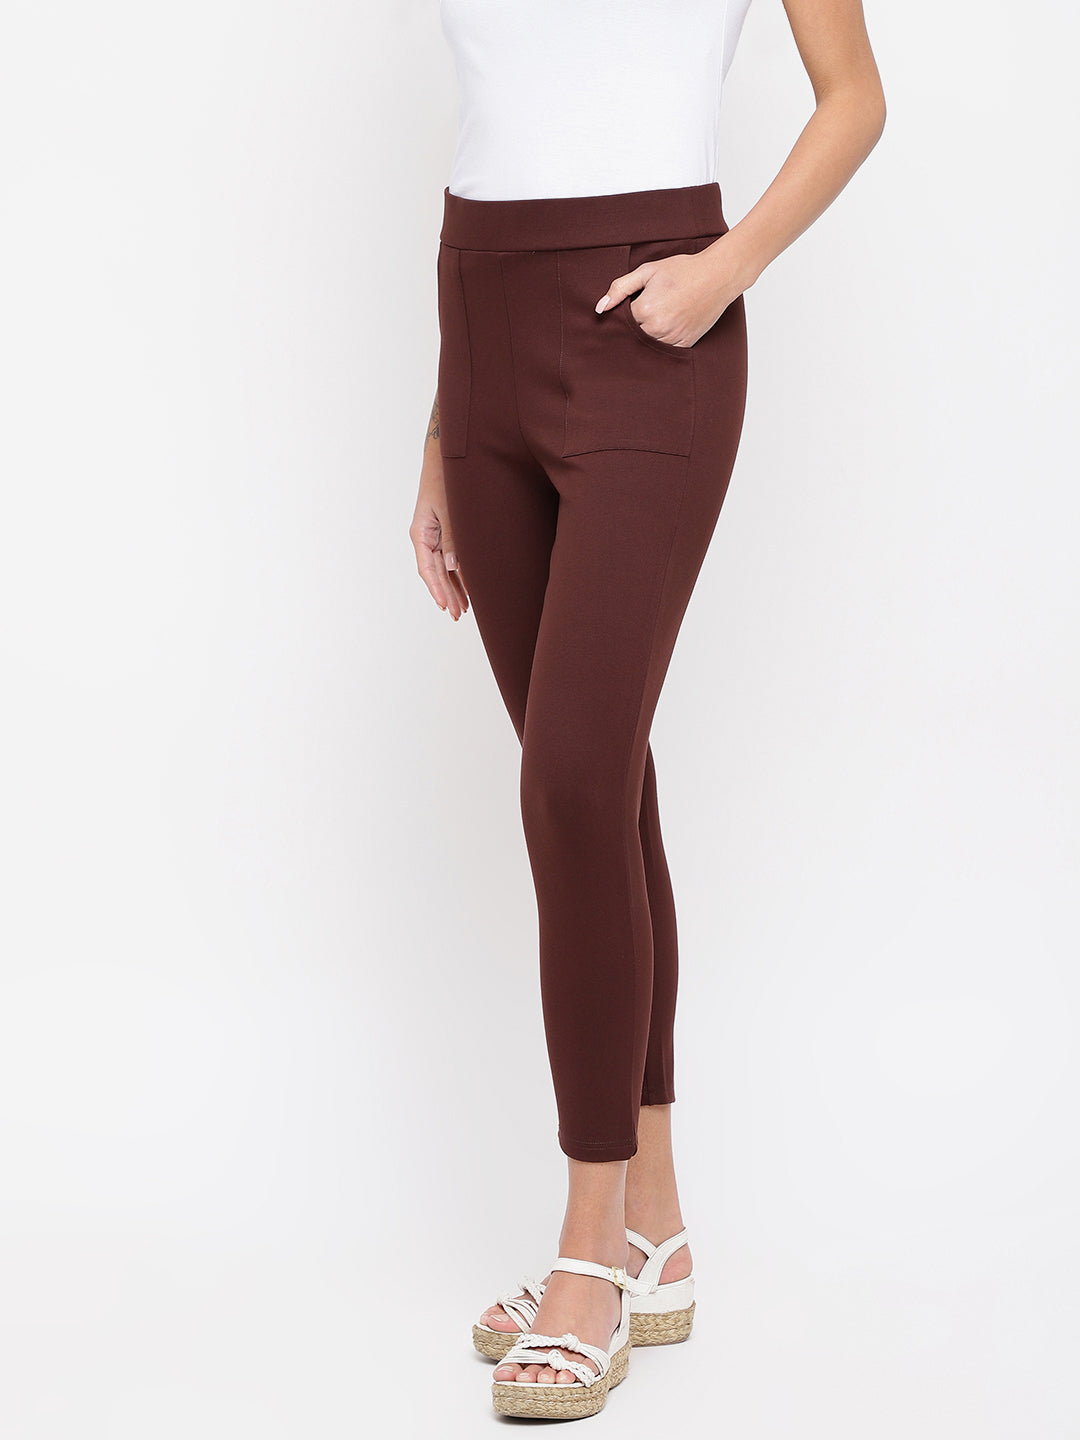 Brown Roma Jeggings With Pocket